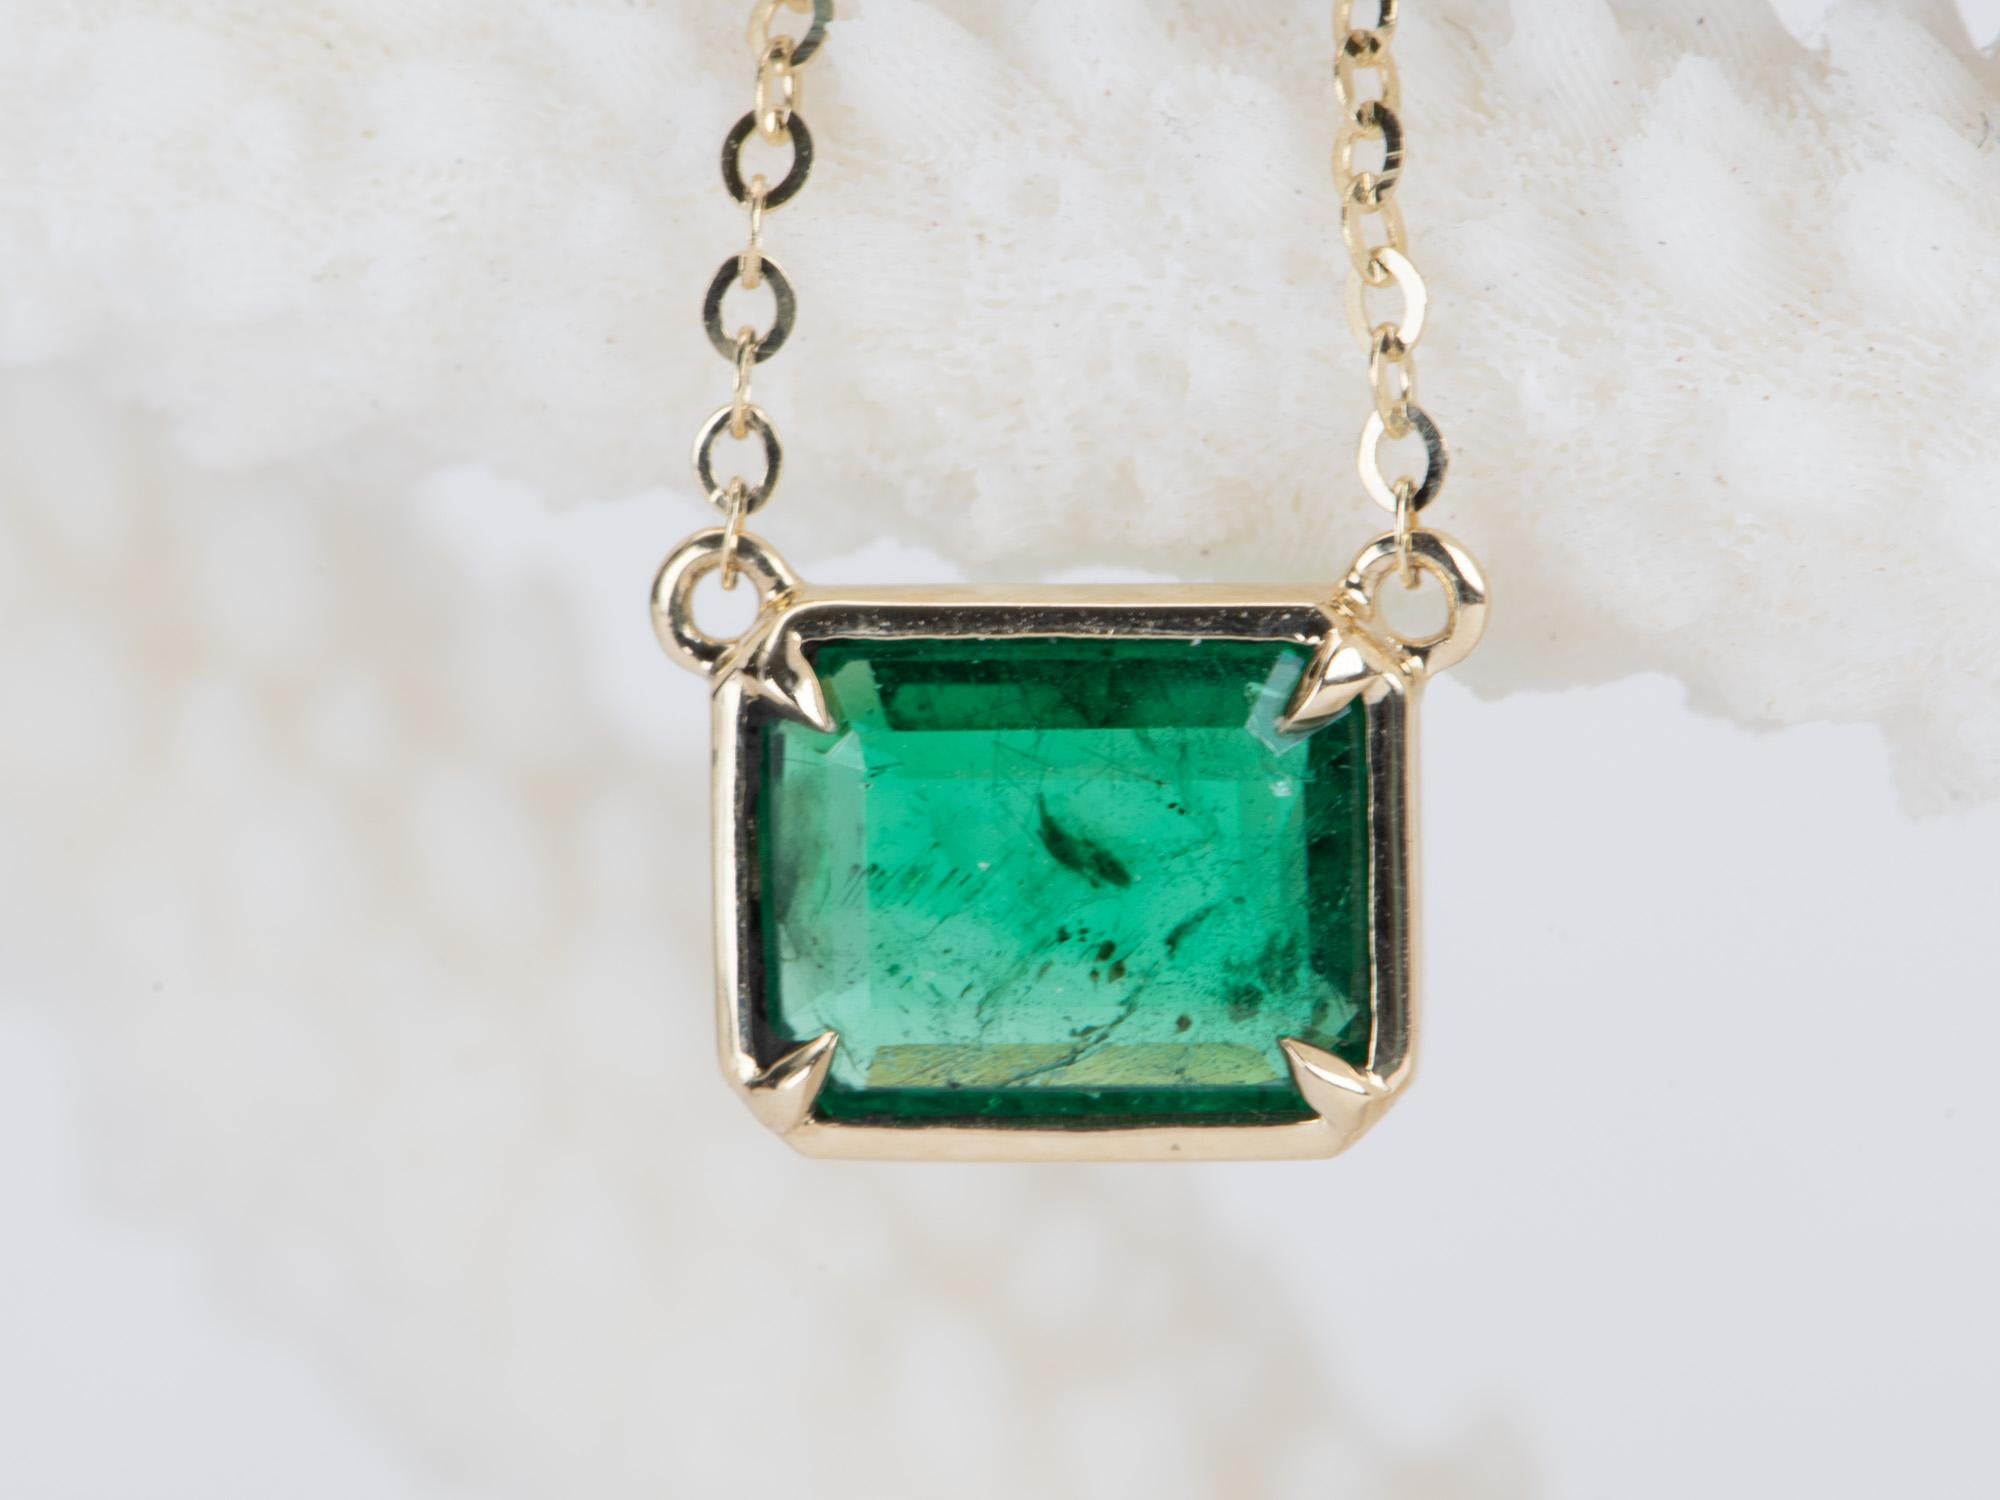 ♥ This beautiful necklace features a stunning Zambian emerald bezel set horizontally, connected to a solid gold chain with a slider bead for free adjustment.
♥ The necklace is 18